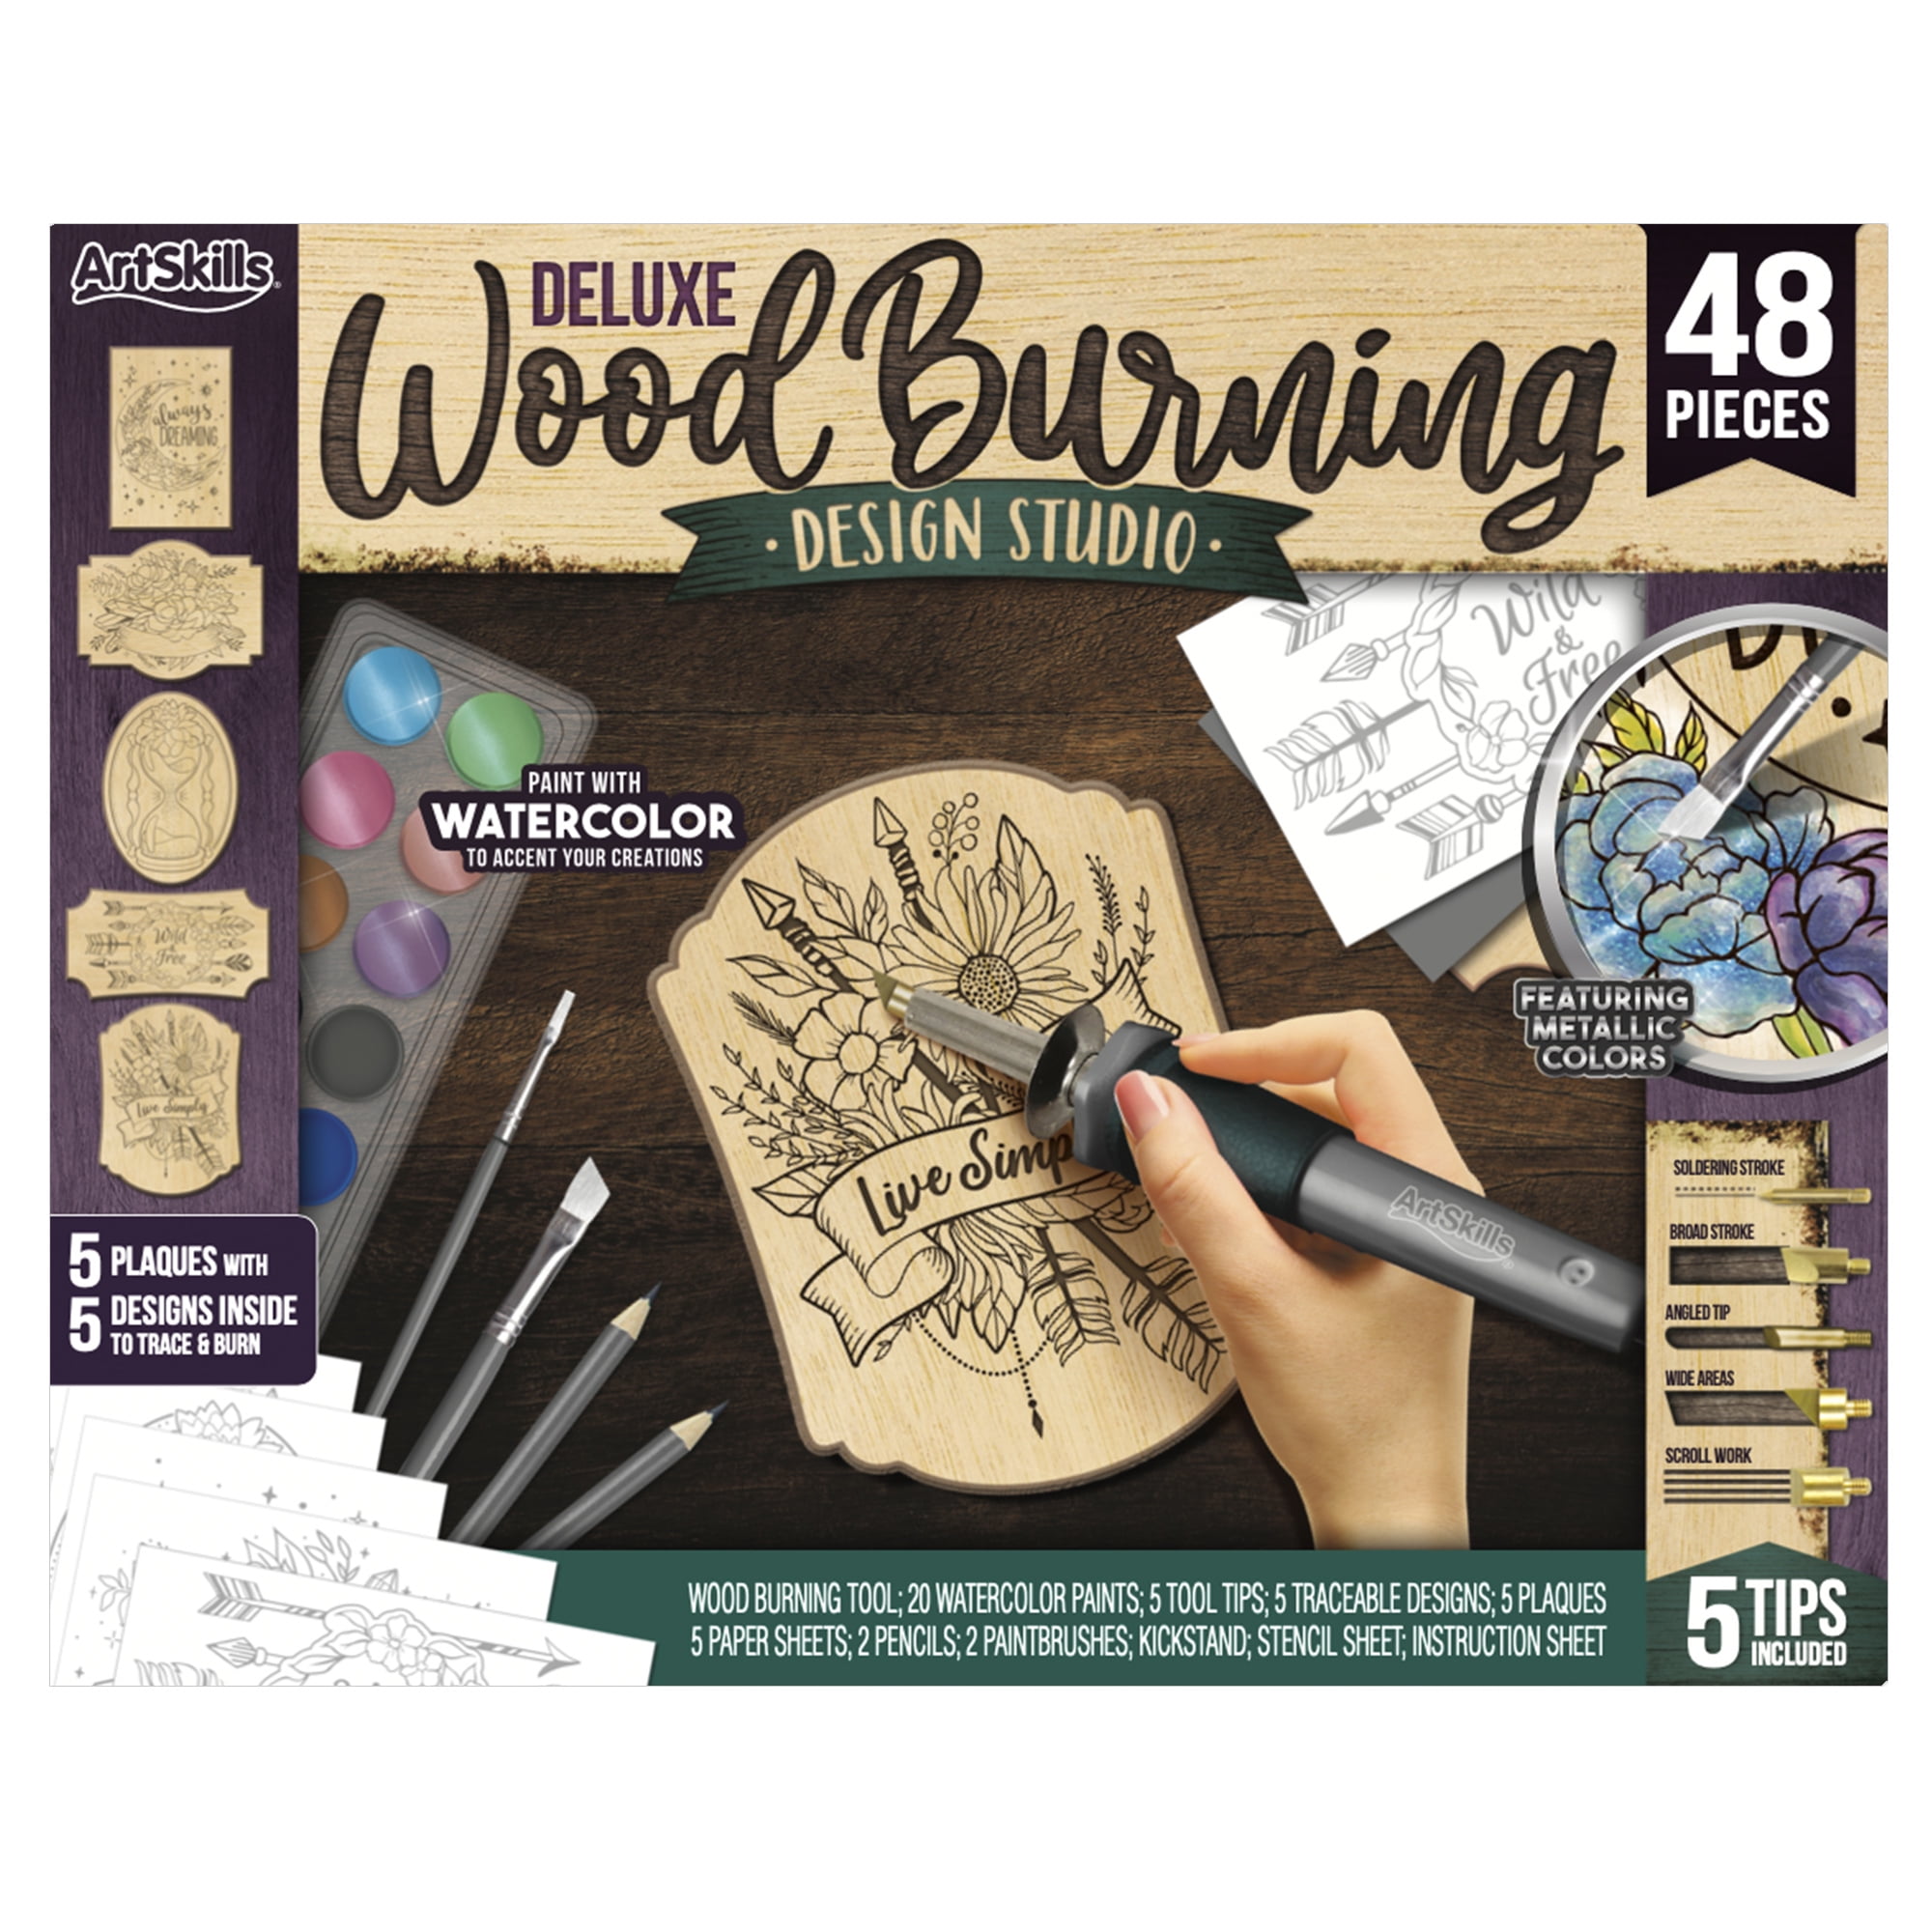 Artskills Wood Burning Kit for Beginners - Deluxe Pyrography Wood Engraving Art Kit with Burner Pen, Stencils, Watercolor Paints - 48 Piece DIY